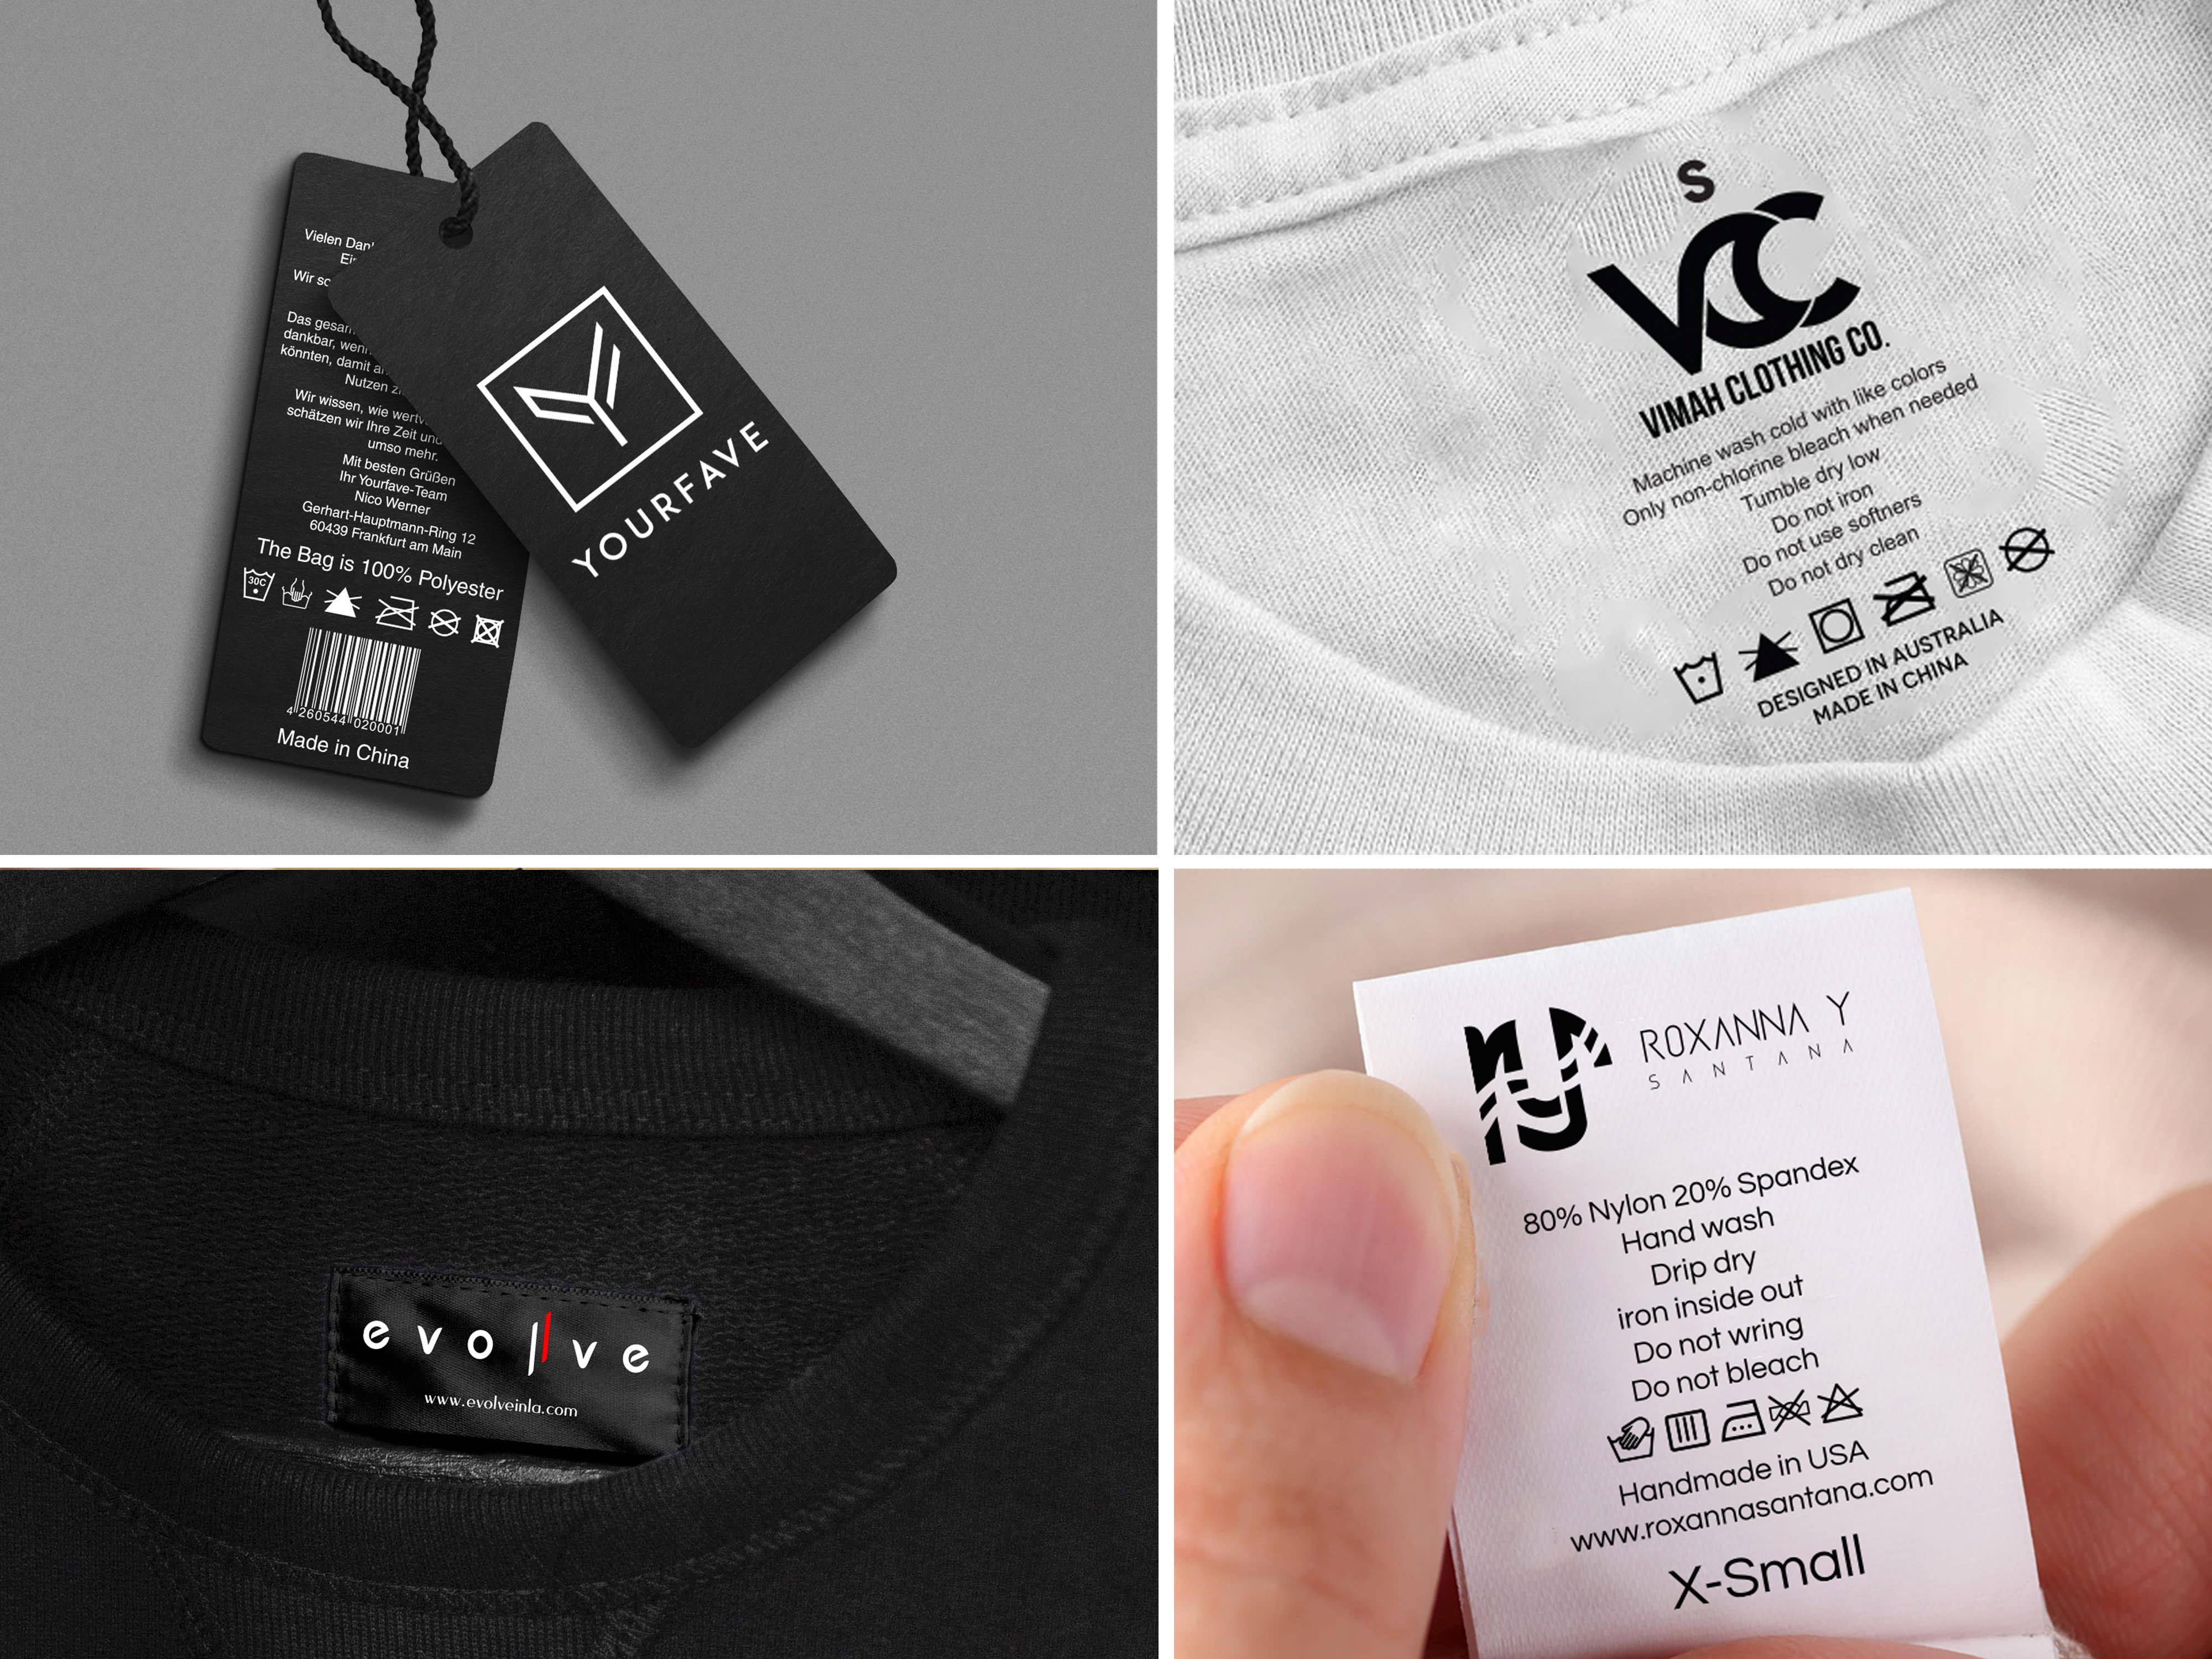 All about brand and clothing labels